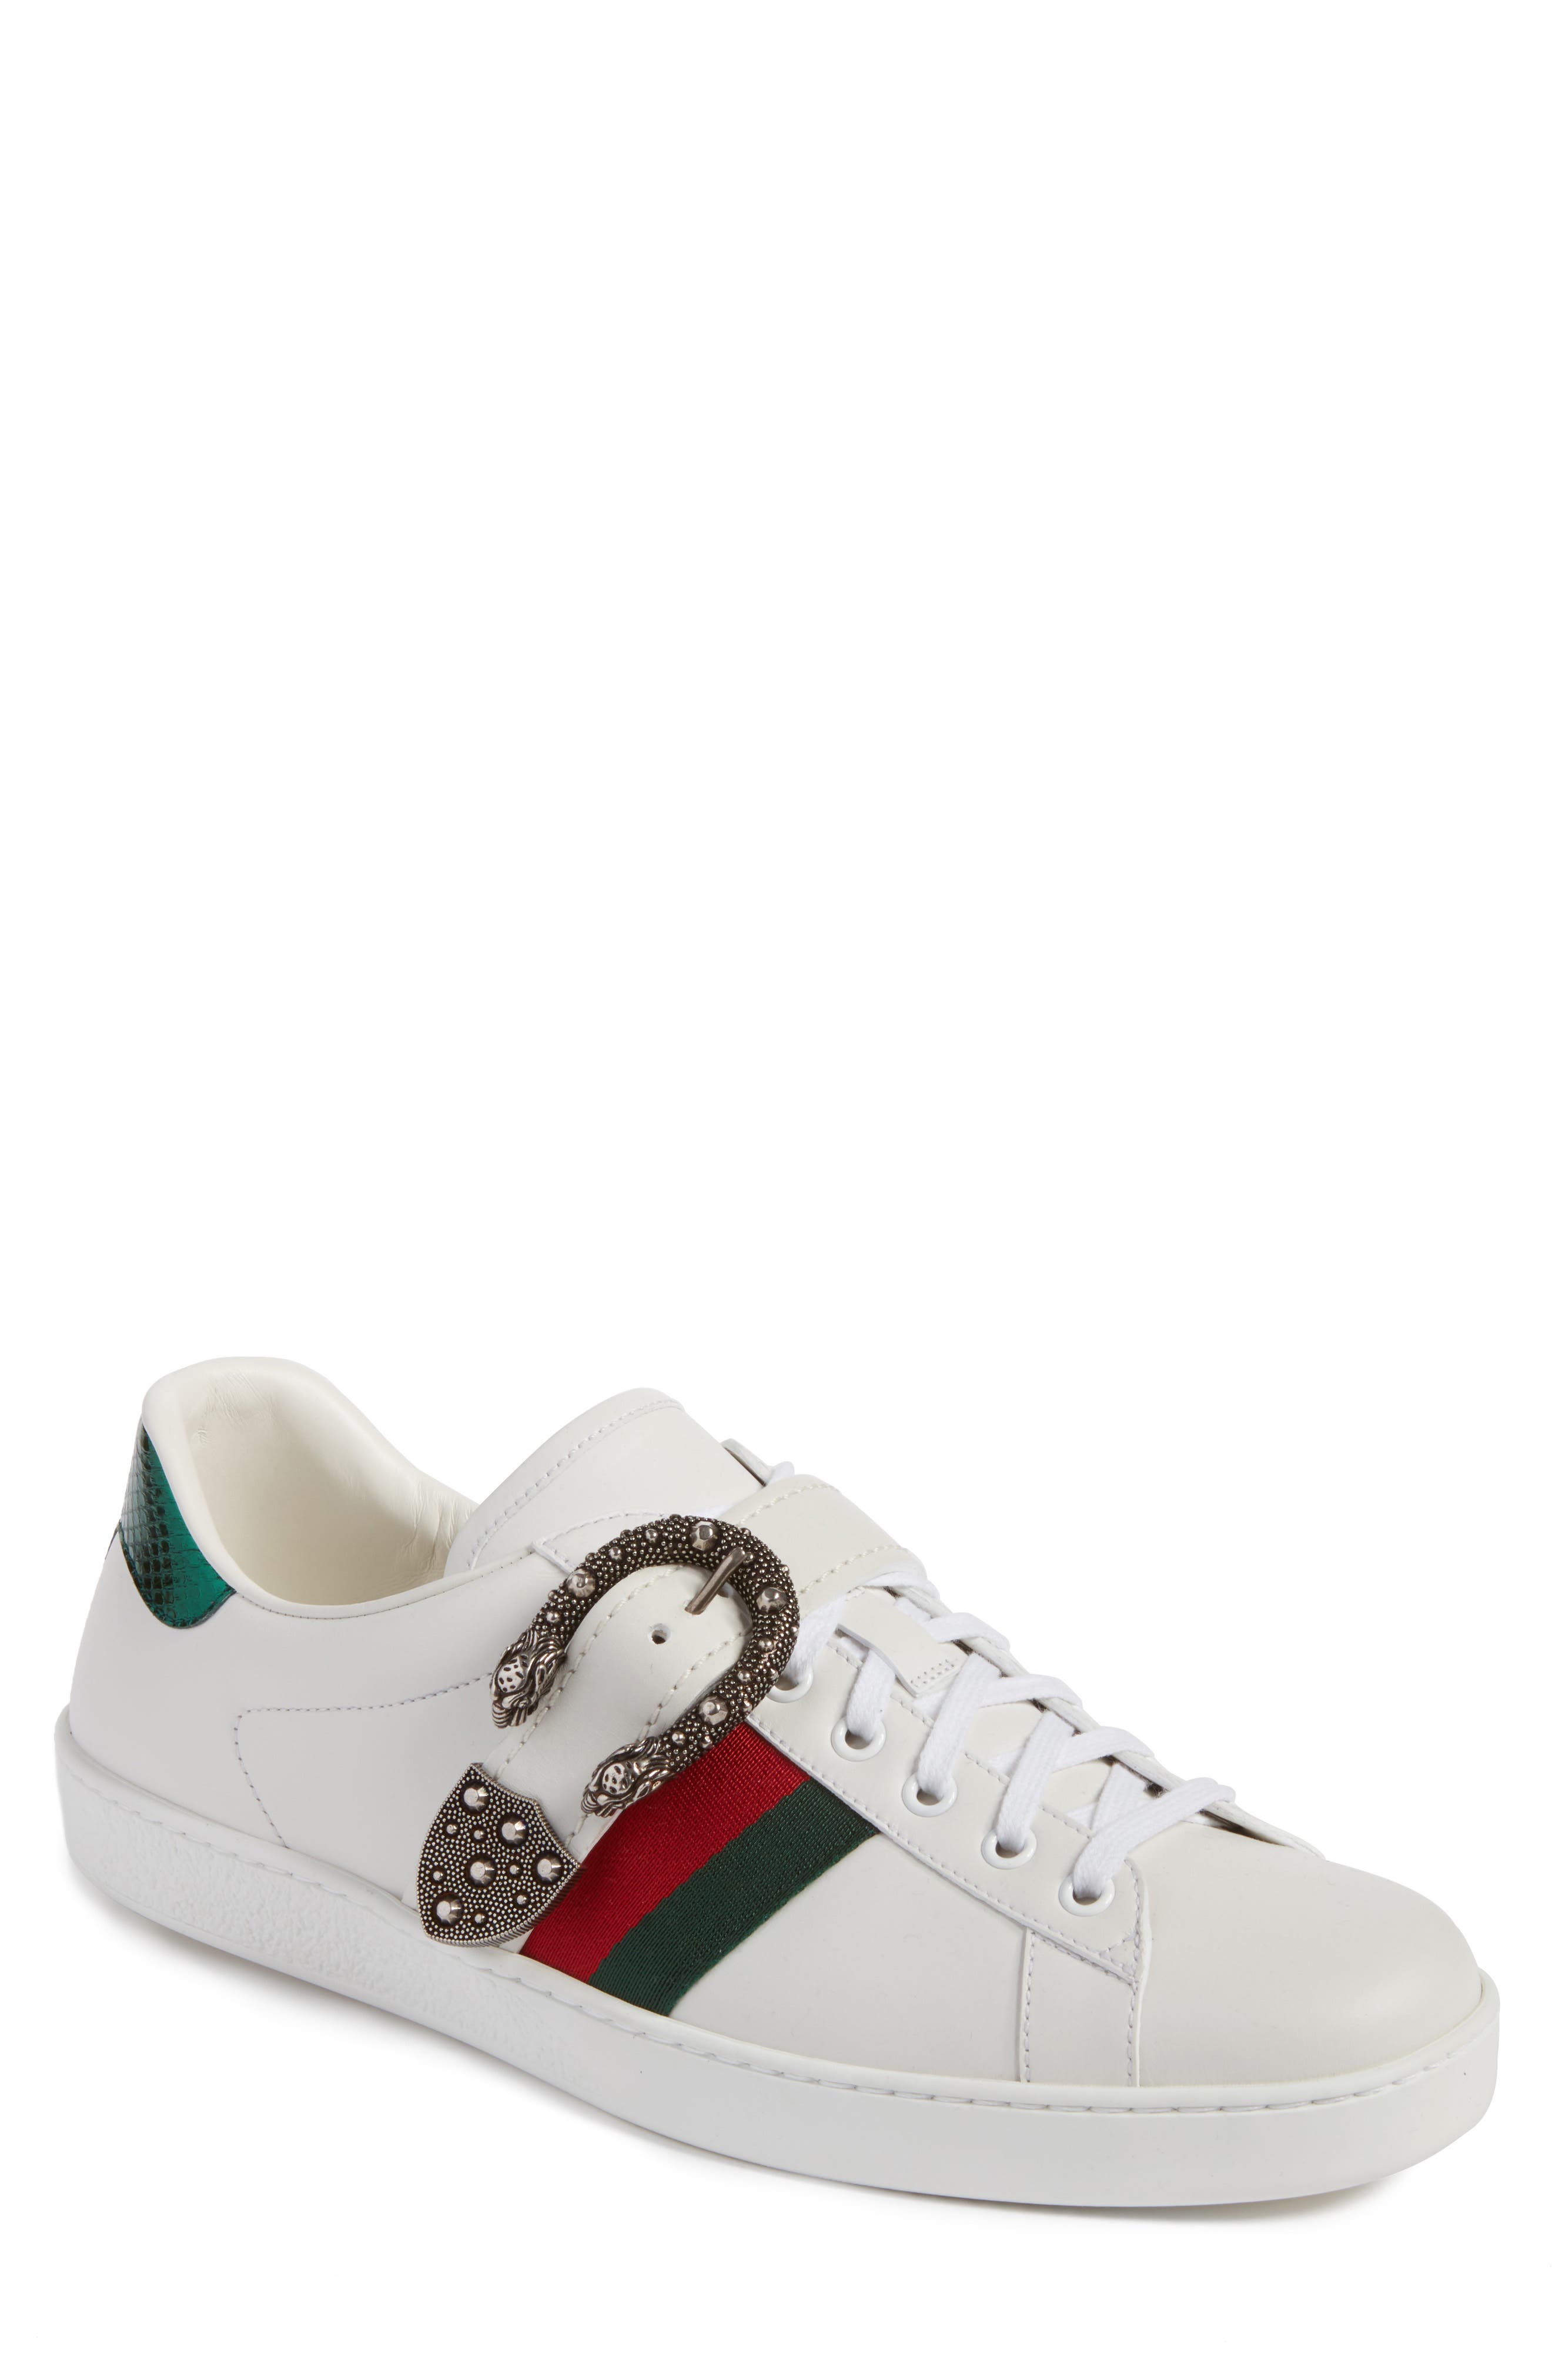 Gucci New Ace Dionysus Buckle Low Top 